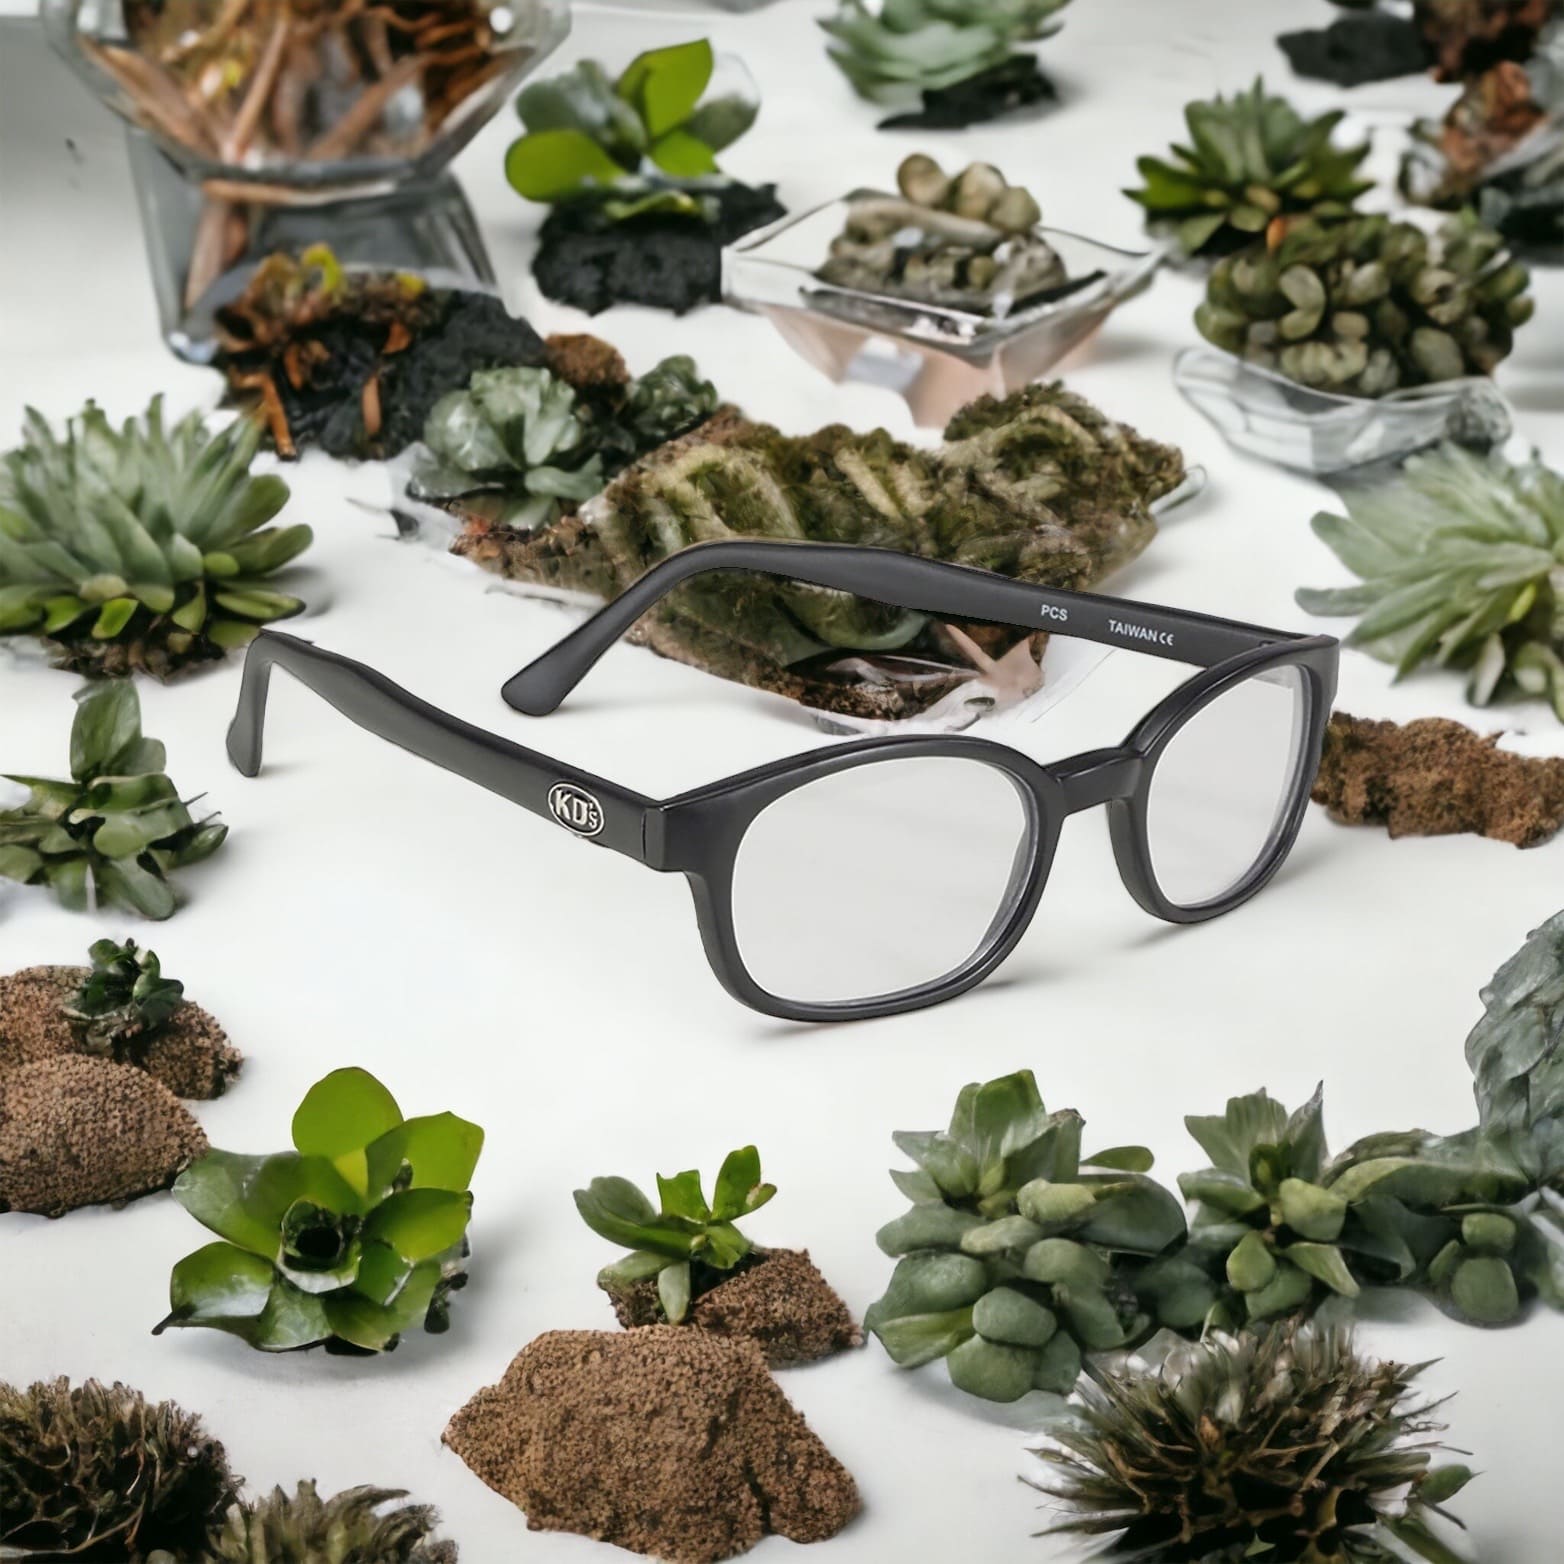 KD's 20015 sunglasses that fit under a motorcycle or ski helmet. With a resistant matte black frame and transparent polycarbonate lenses placed on the front of the plants.